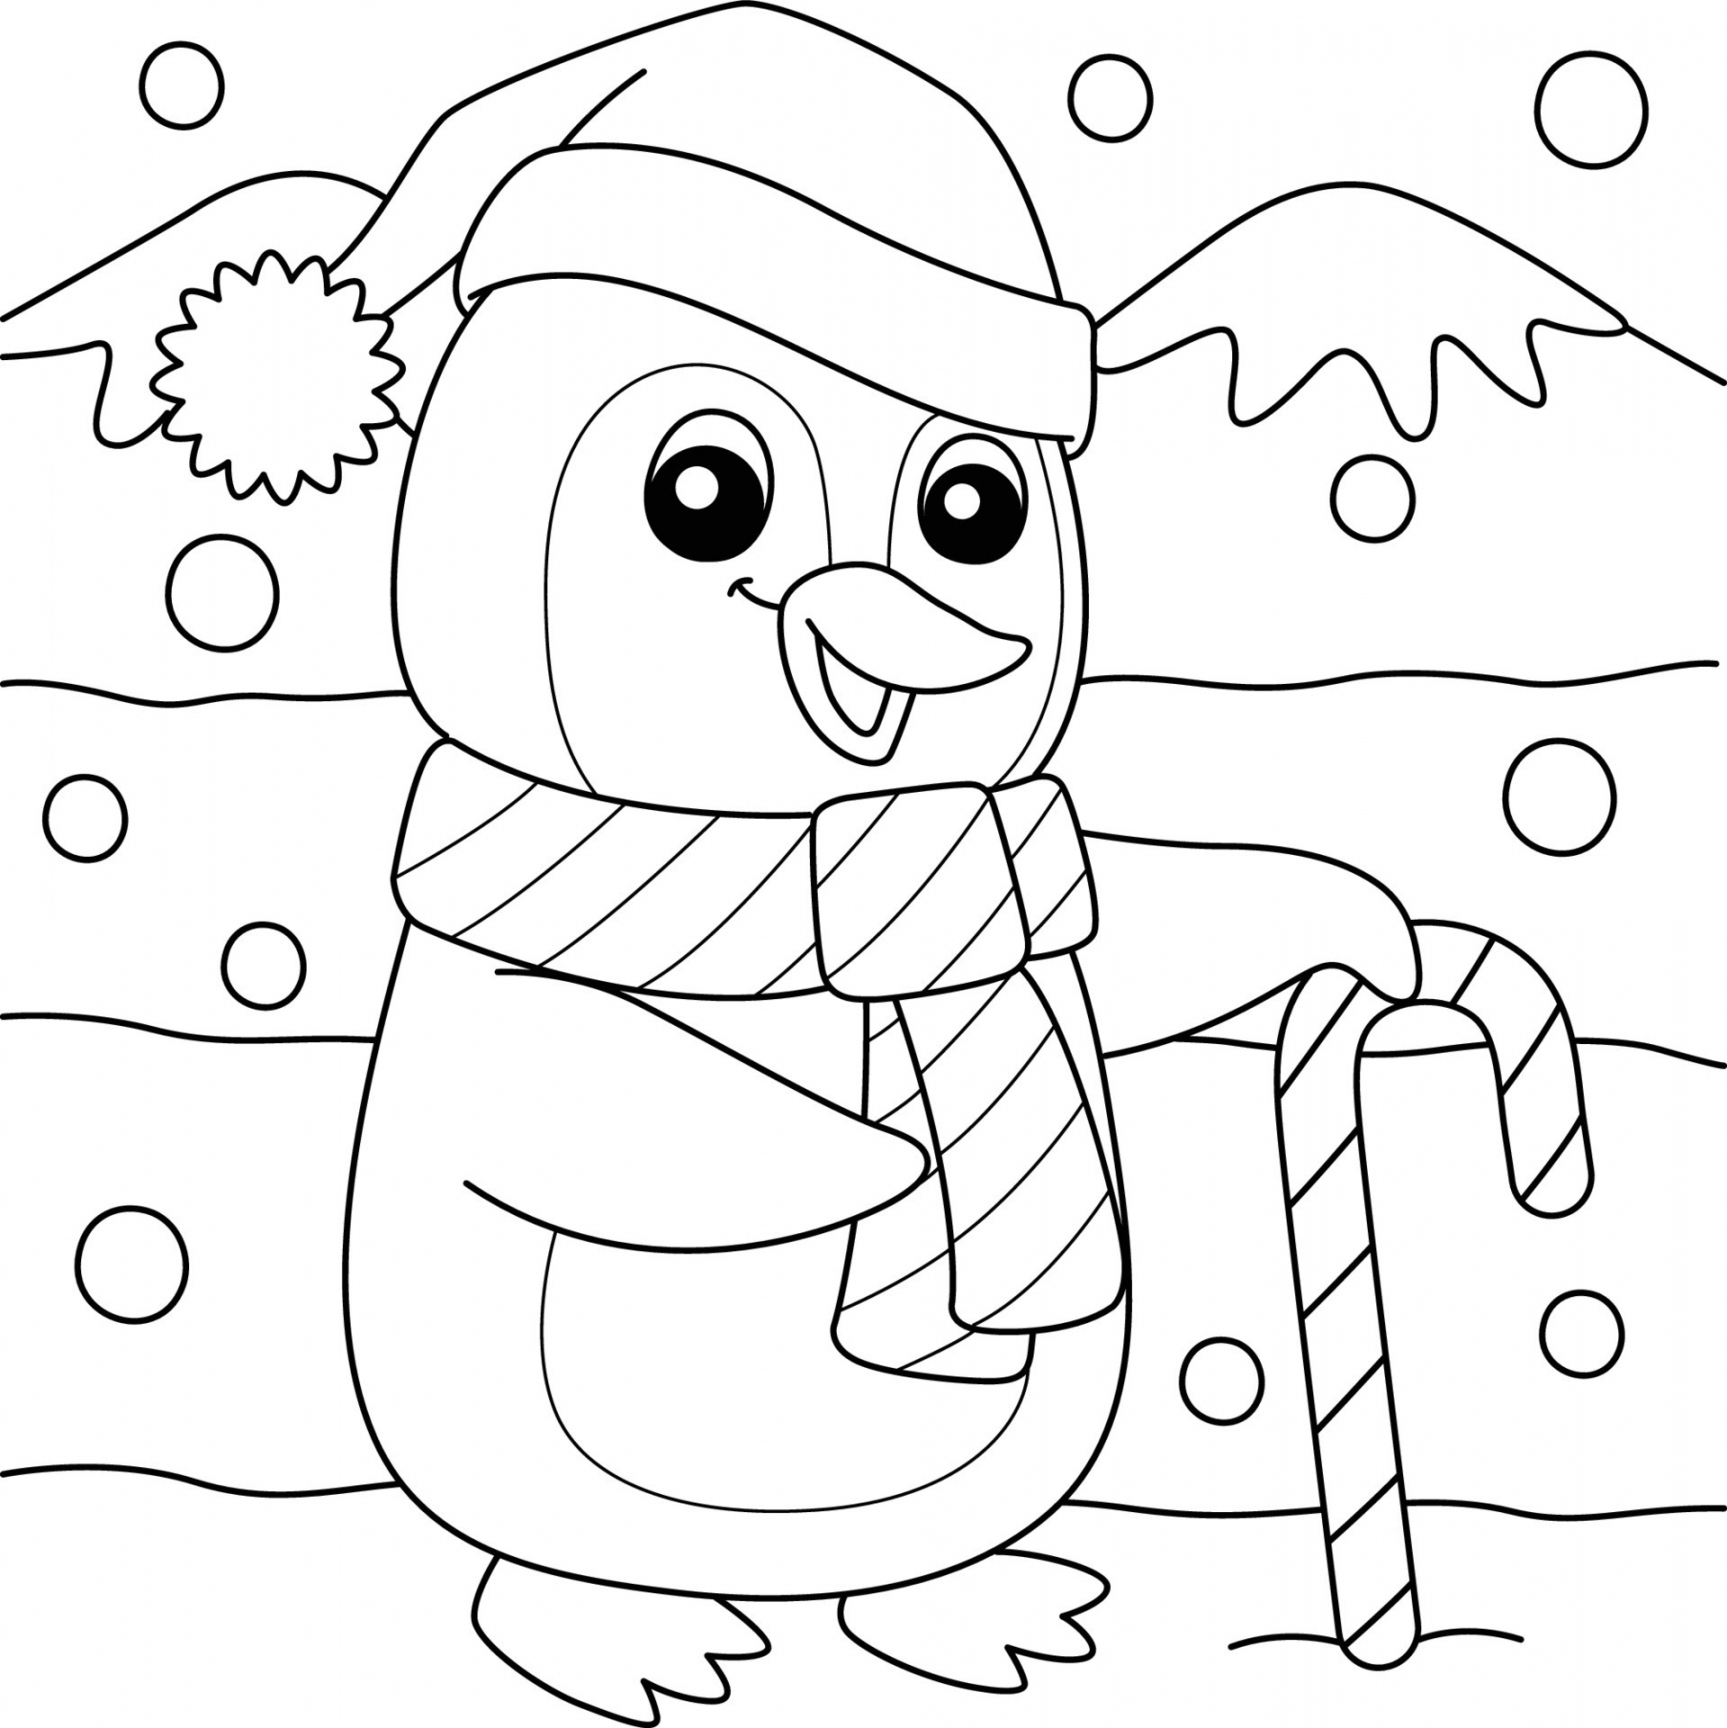 Christmas Coloring Pages Free Printable - Printable - Christmas Coloring Page Vector Art, Icons, and Graphics for Free